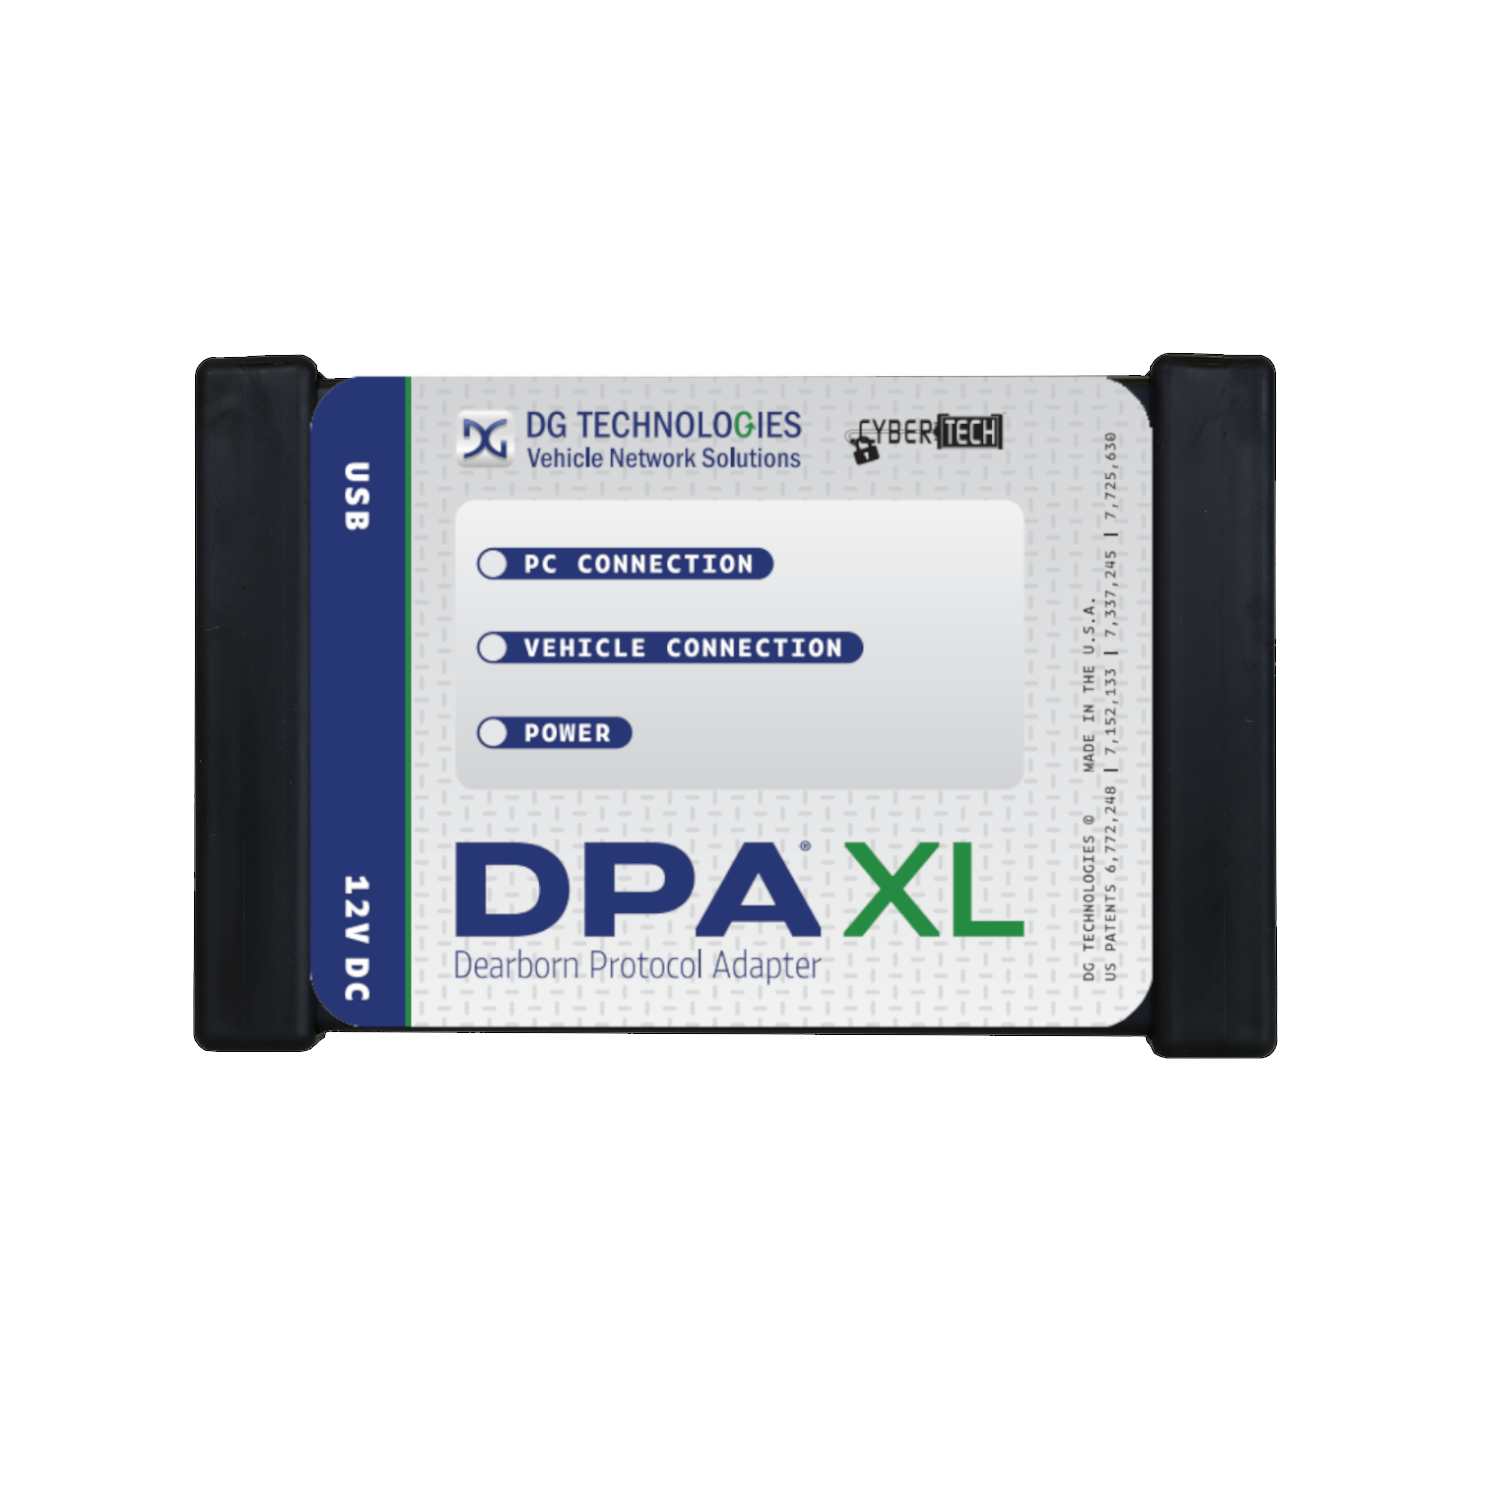 Latest DPA XL Update, Version 3.08 is now Available from DG Technologies!